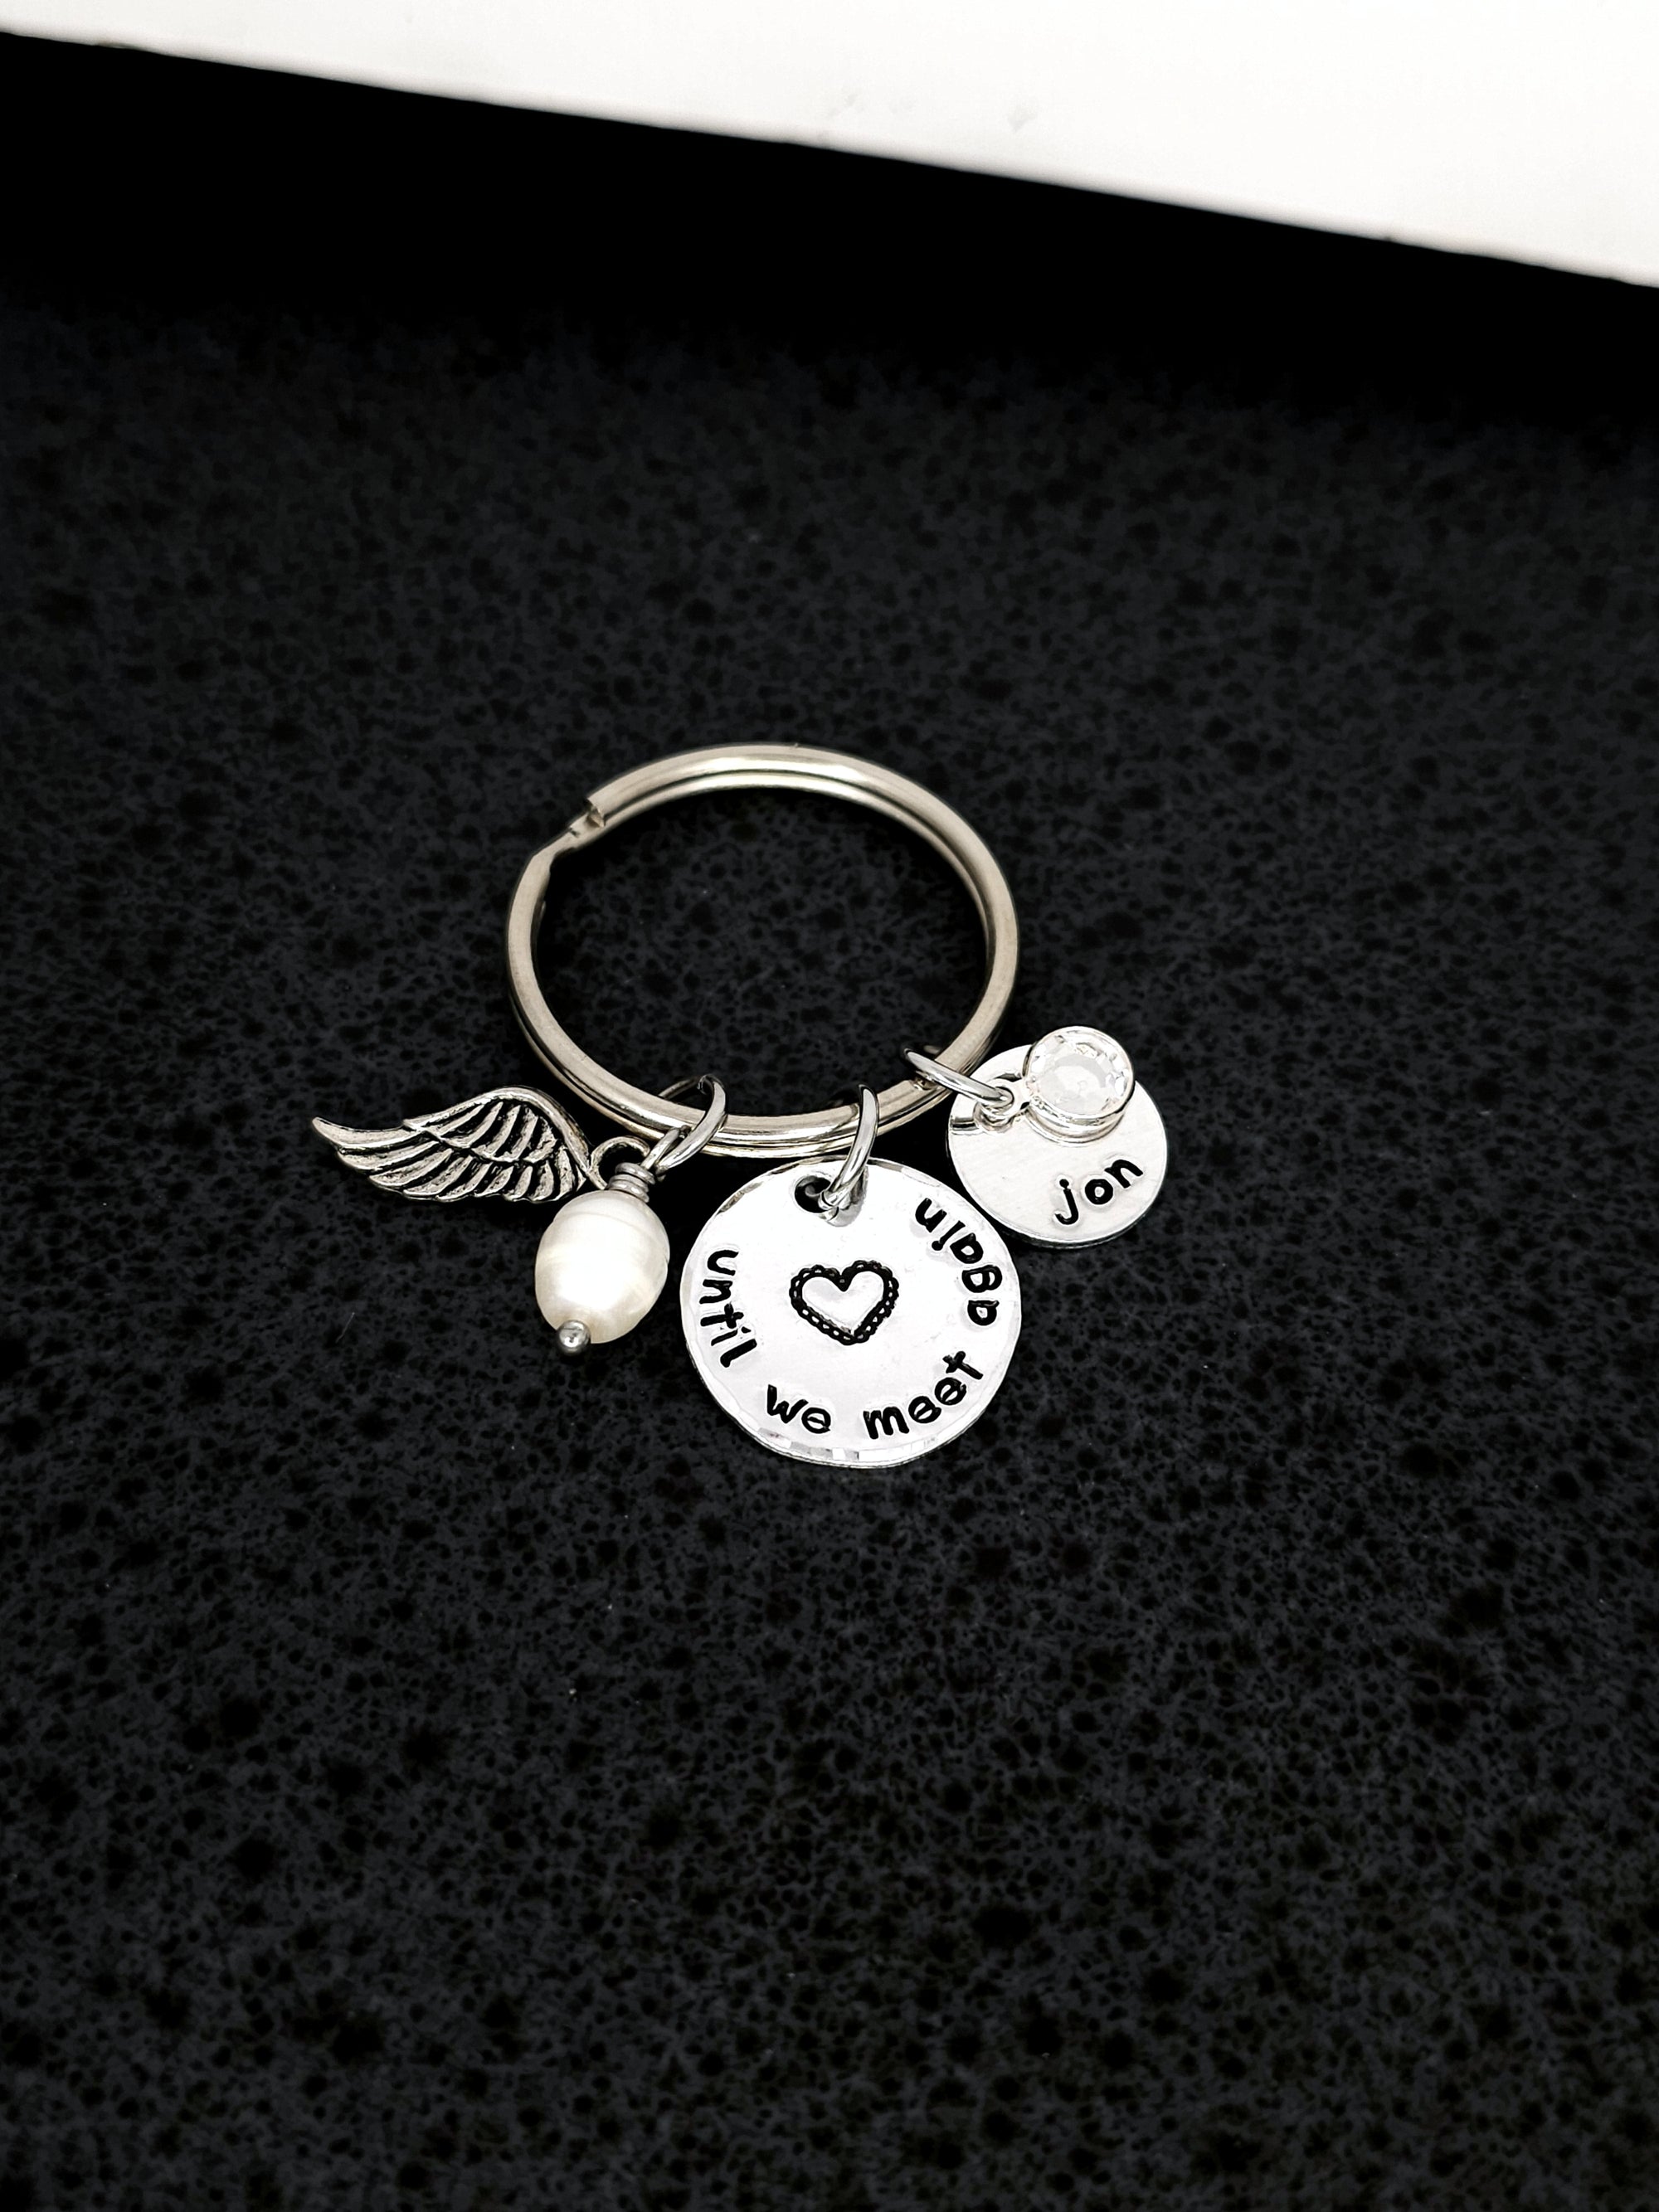 Until We Meet Again Memorial Keychain, Carry You With Me, Remembrance Jewelry, Hold You In My Heart, Hold You In Heaven